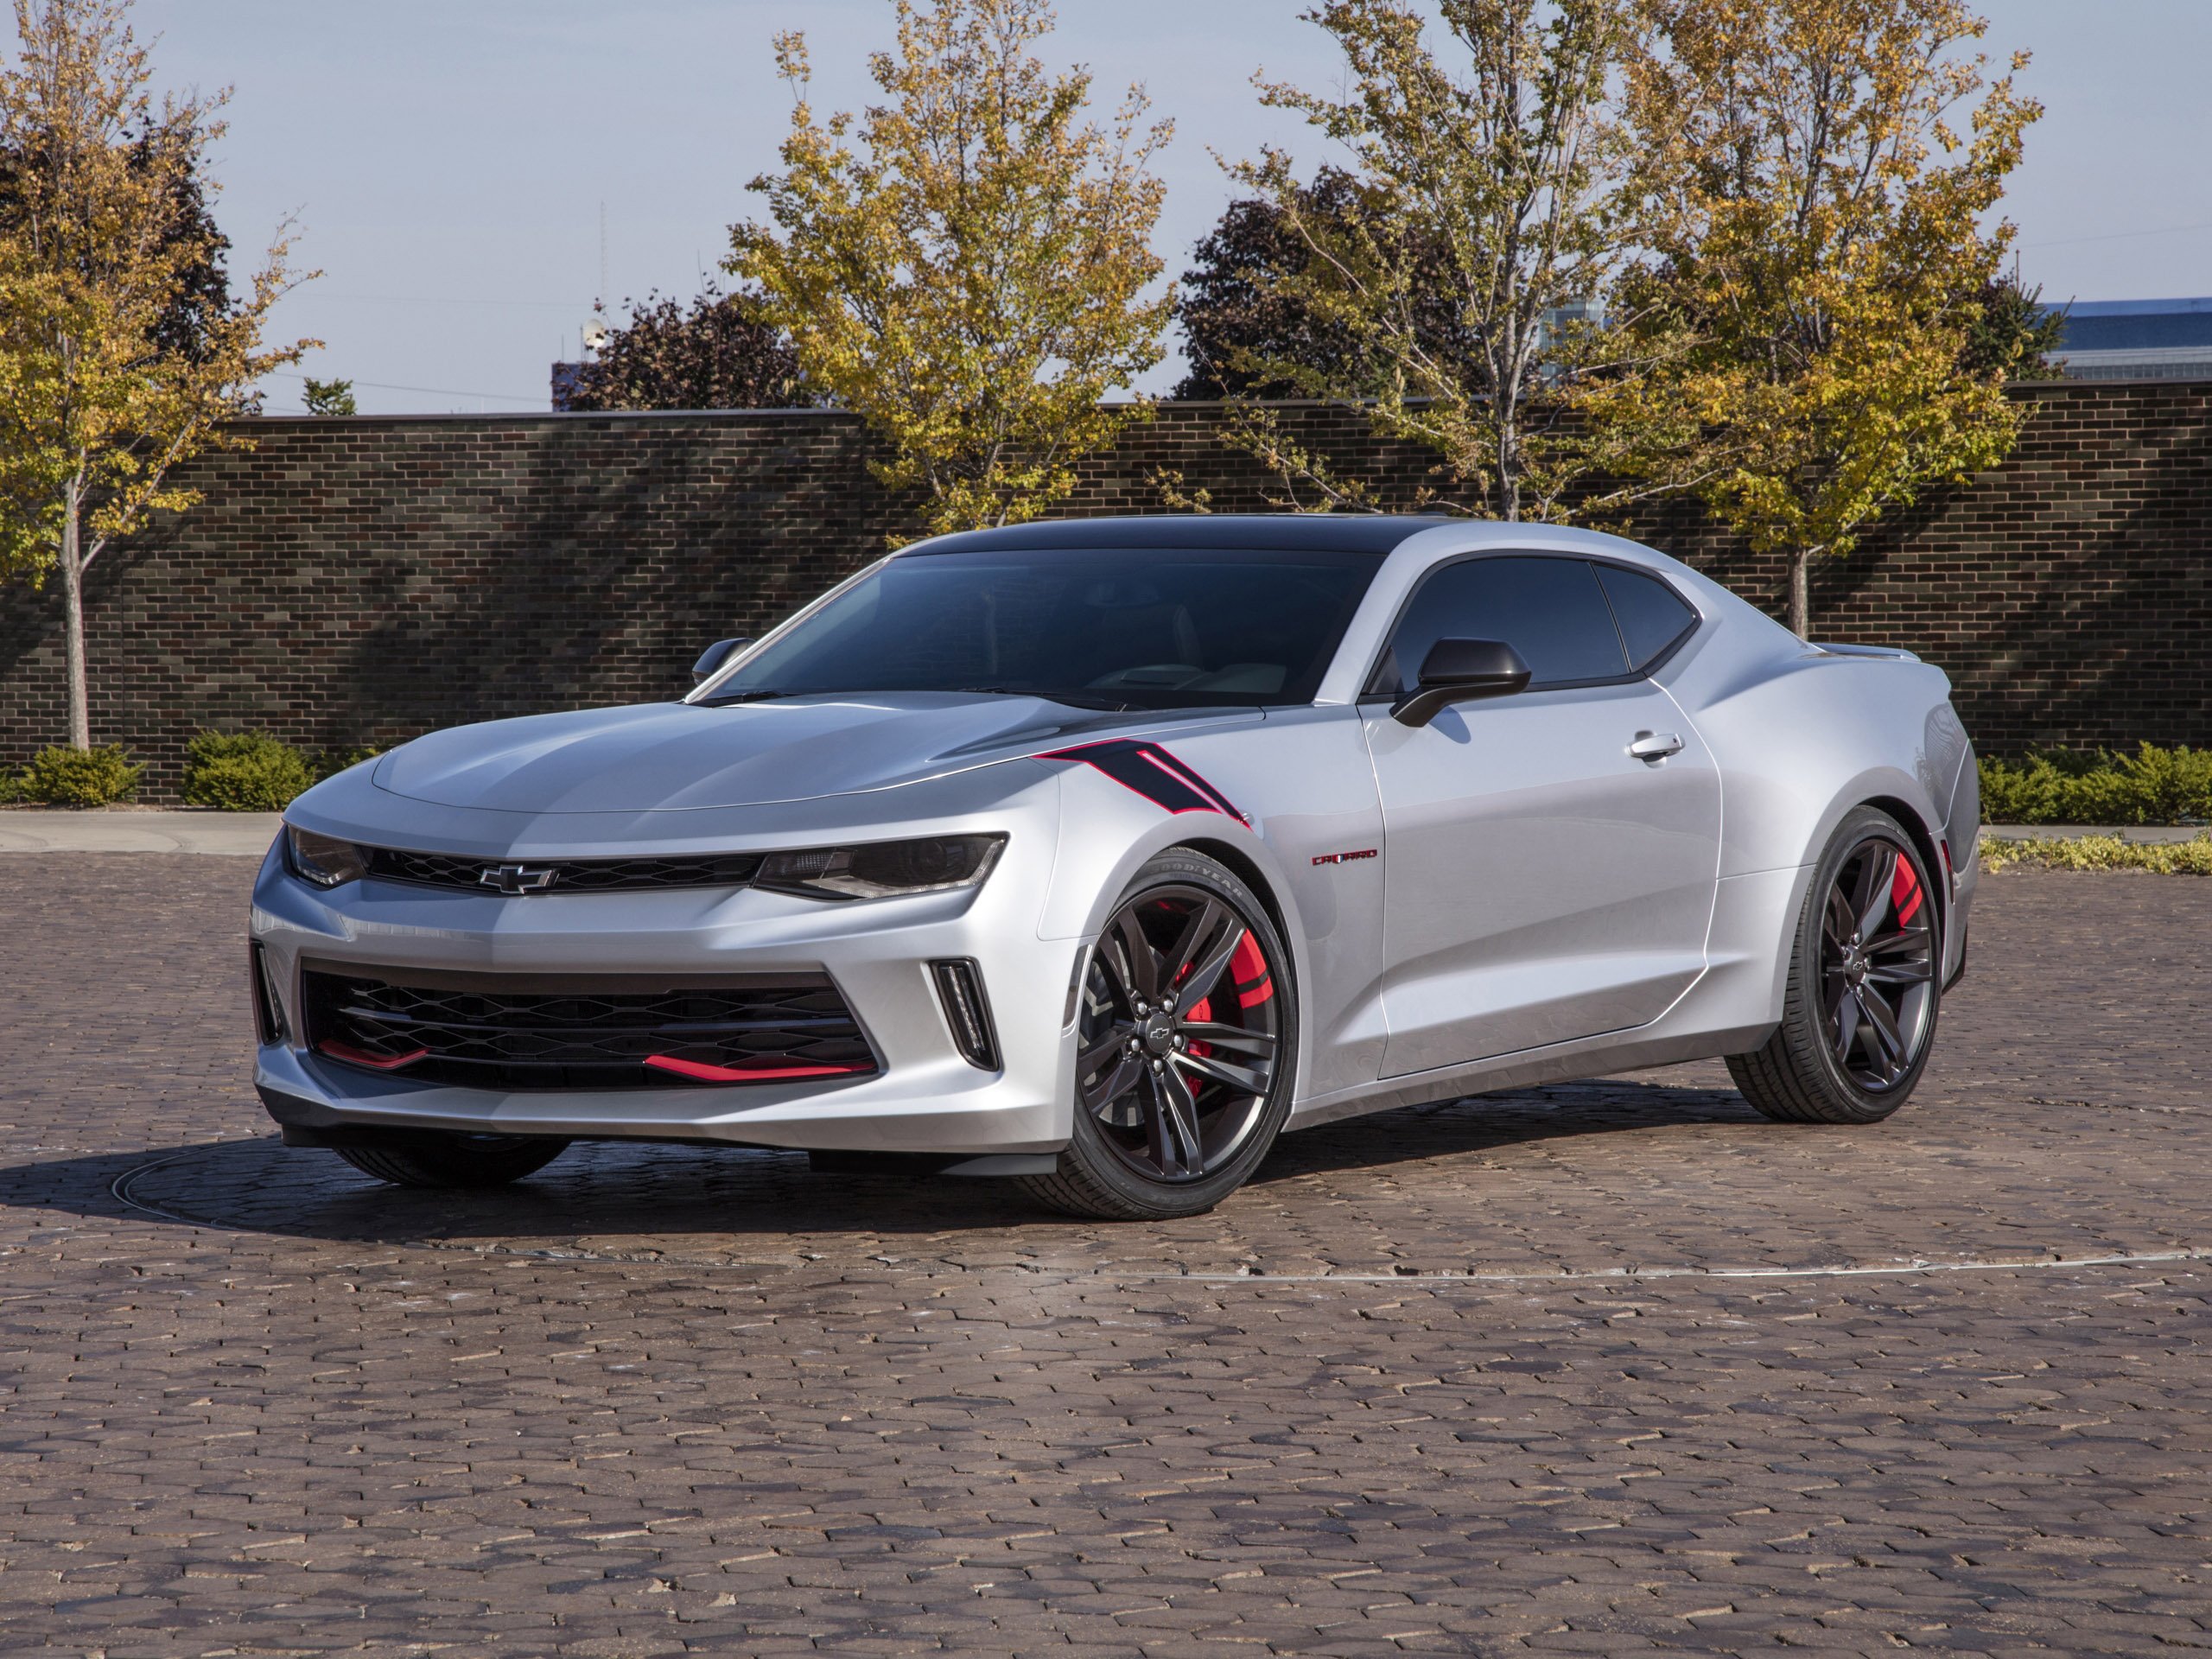 2015, Chevrolet, Camaro, Red, Line, Series, Concept, Muscle Wallpaper